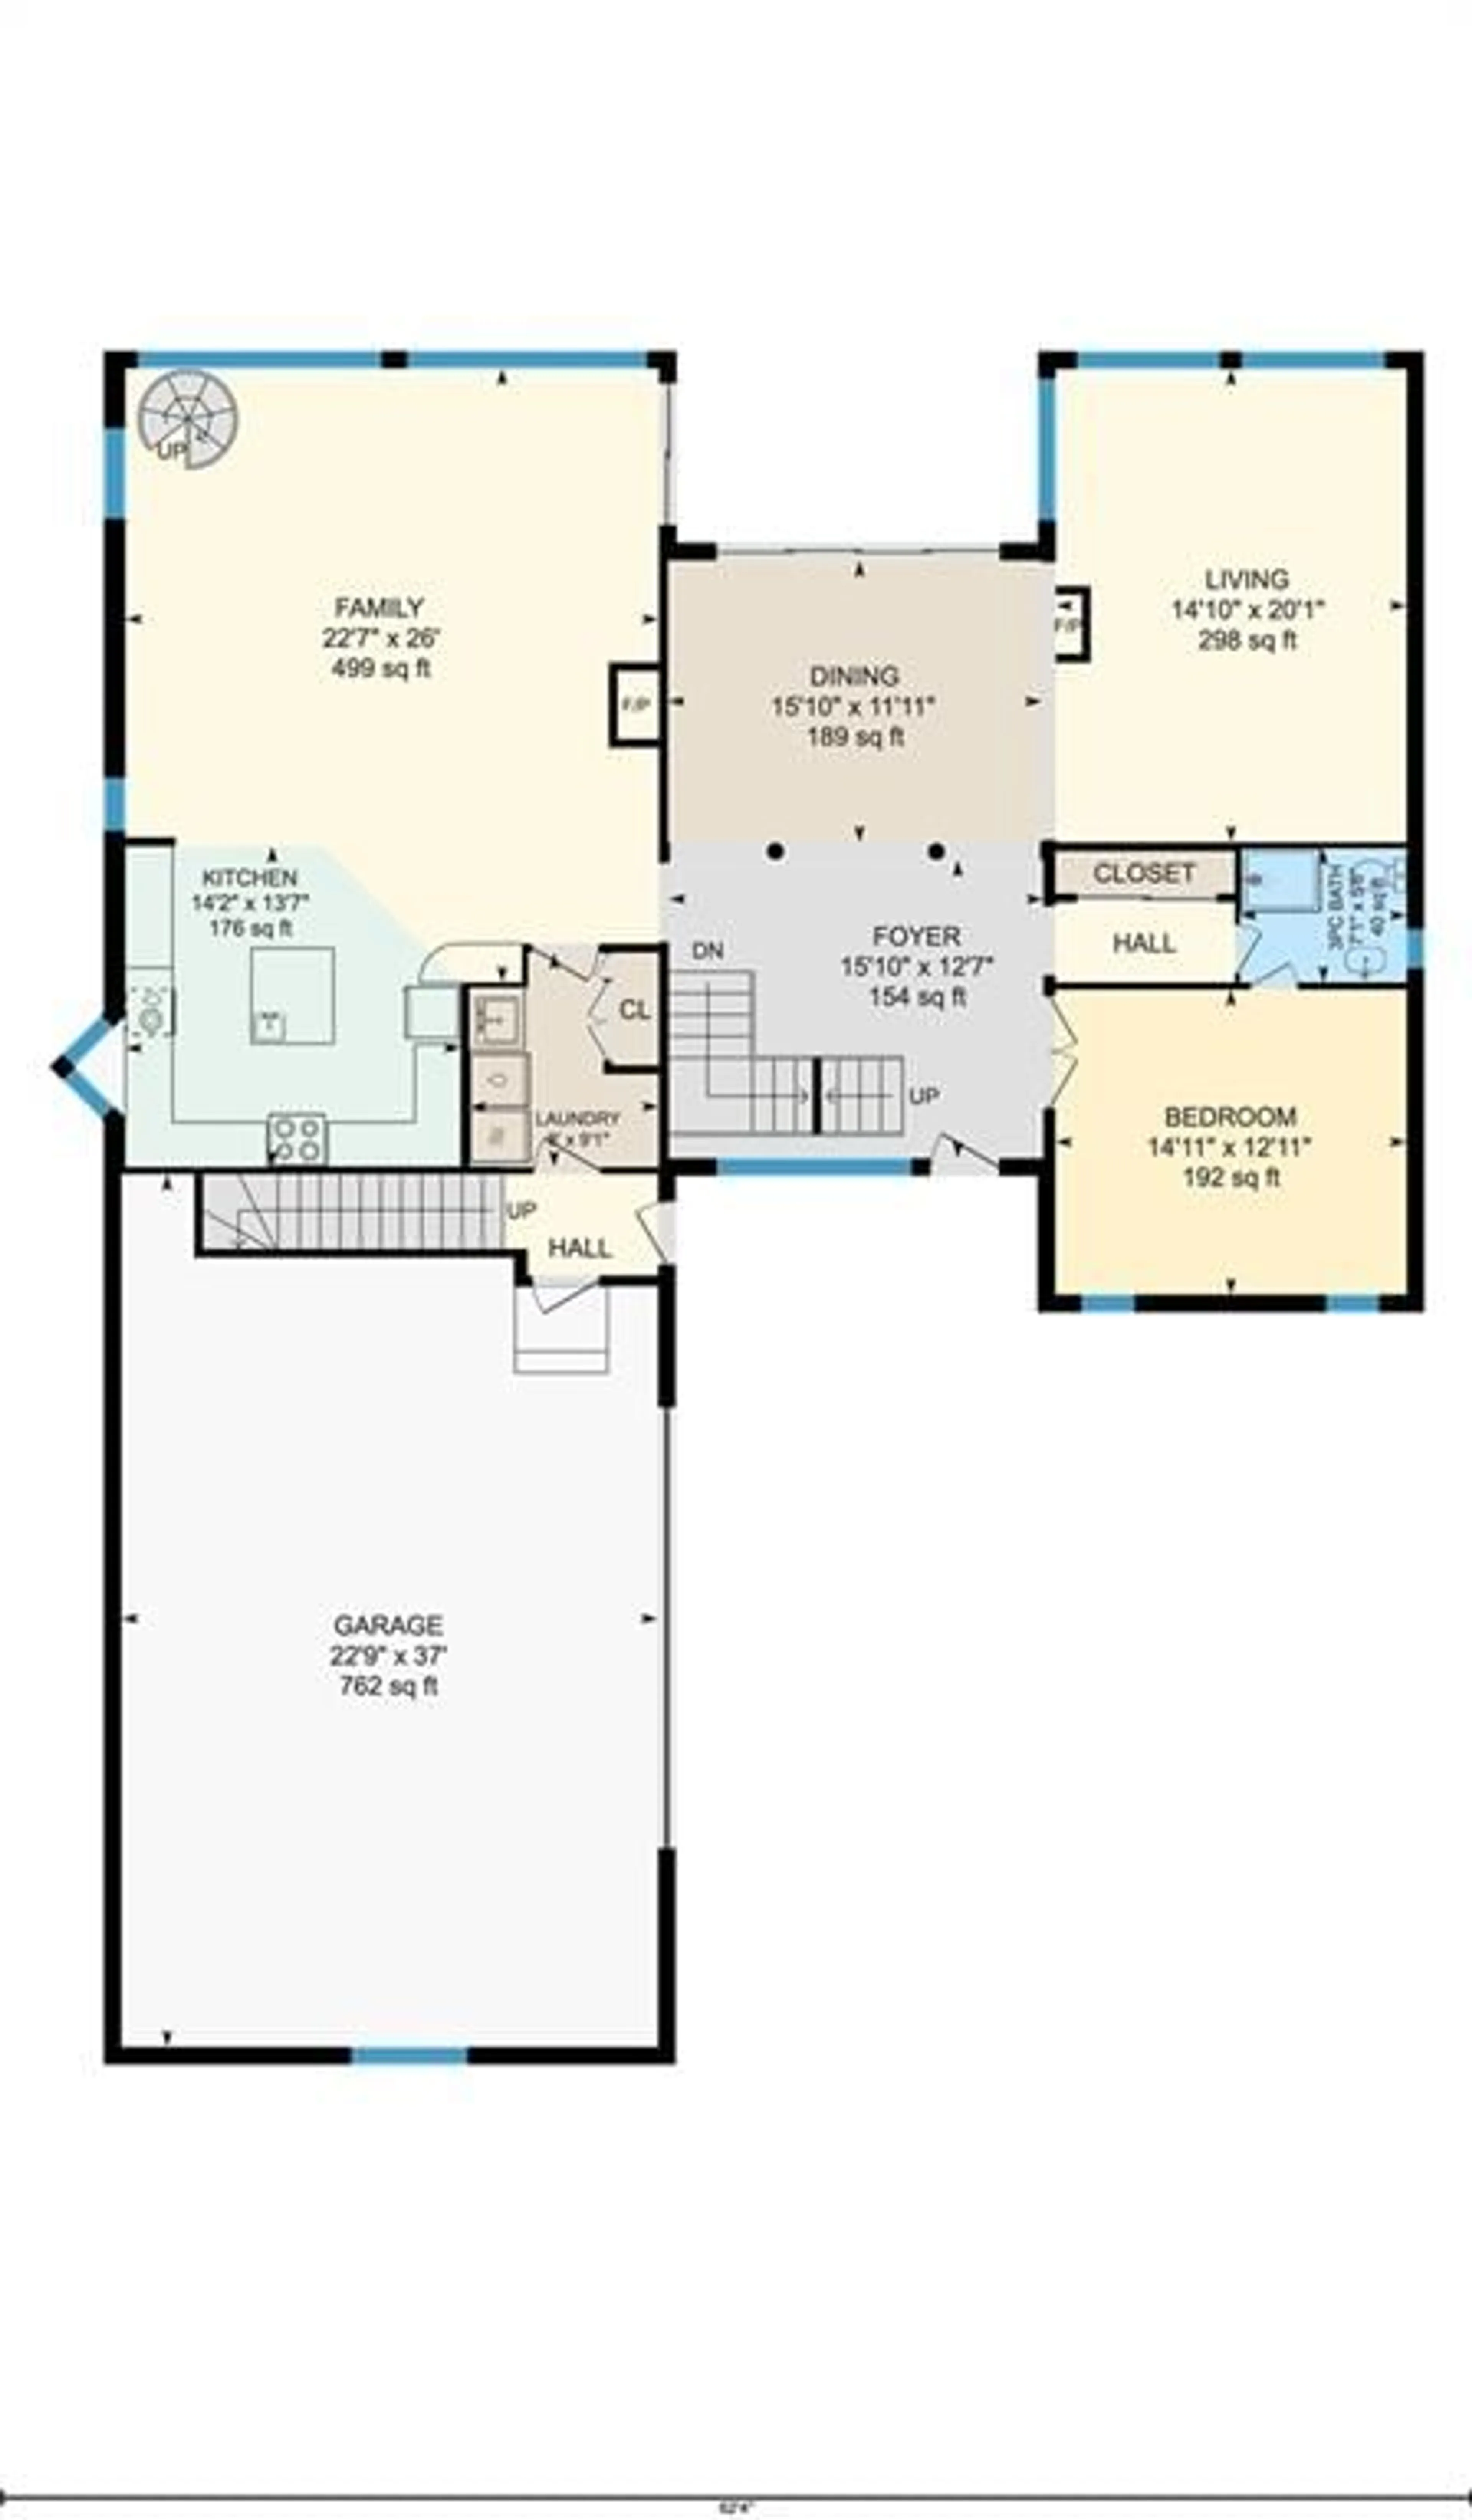 Floor plan for 134 OLIVE St, Grimsby Ontario L3M 5C8